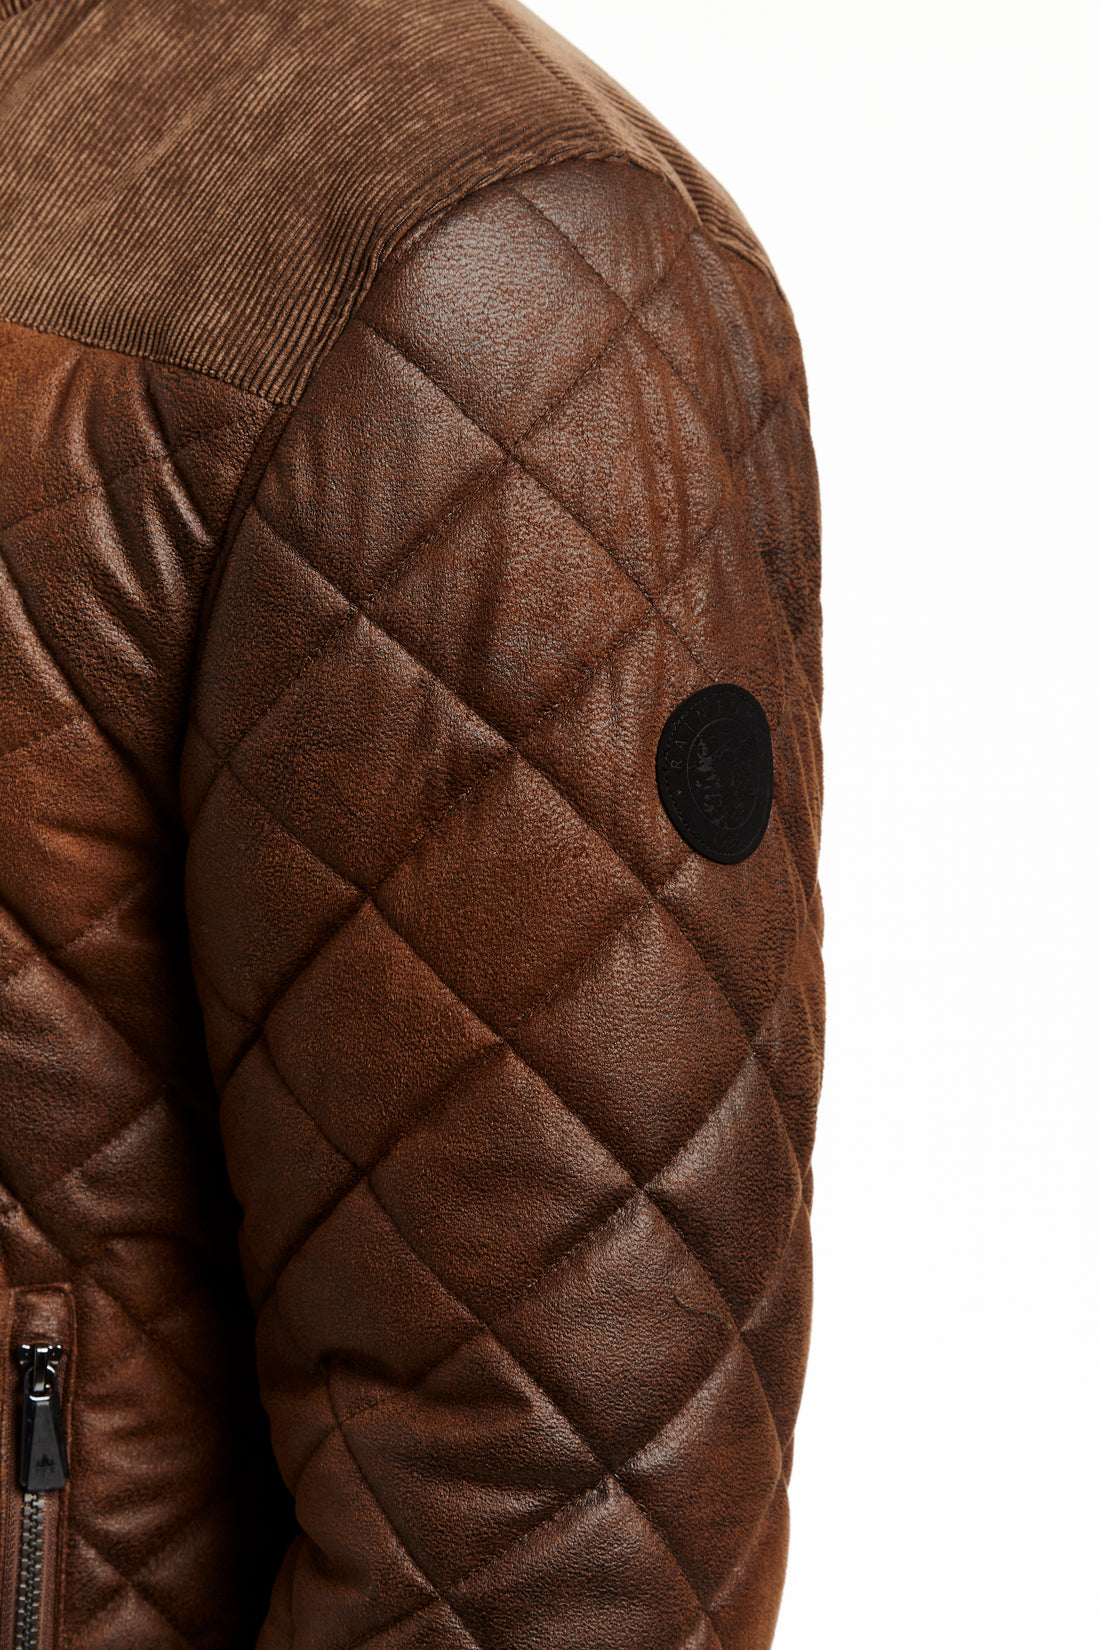 SINGLE LAYER QUILTED NUBUCK JACKET with THERMOLUXE FILL